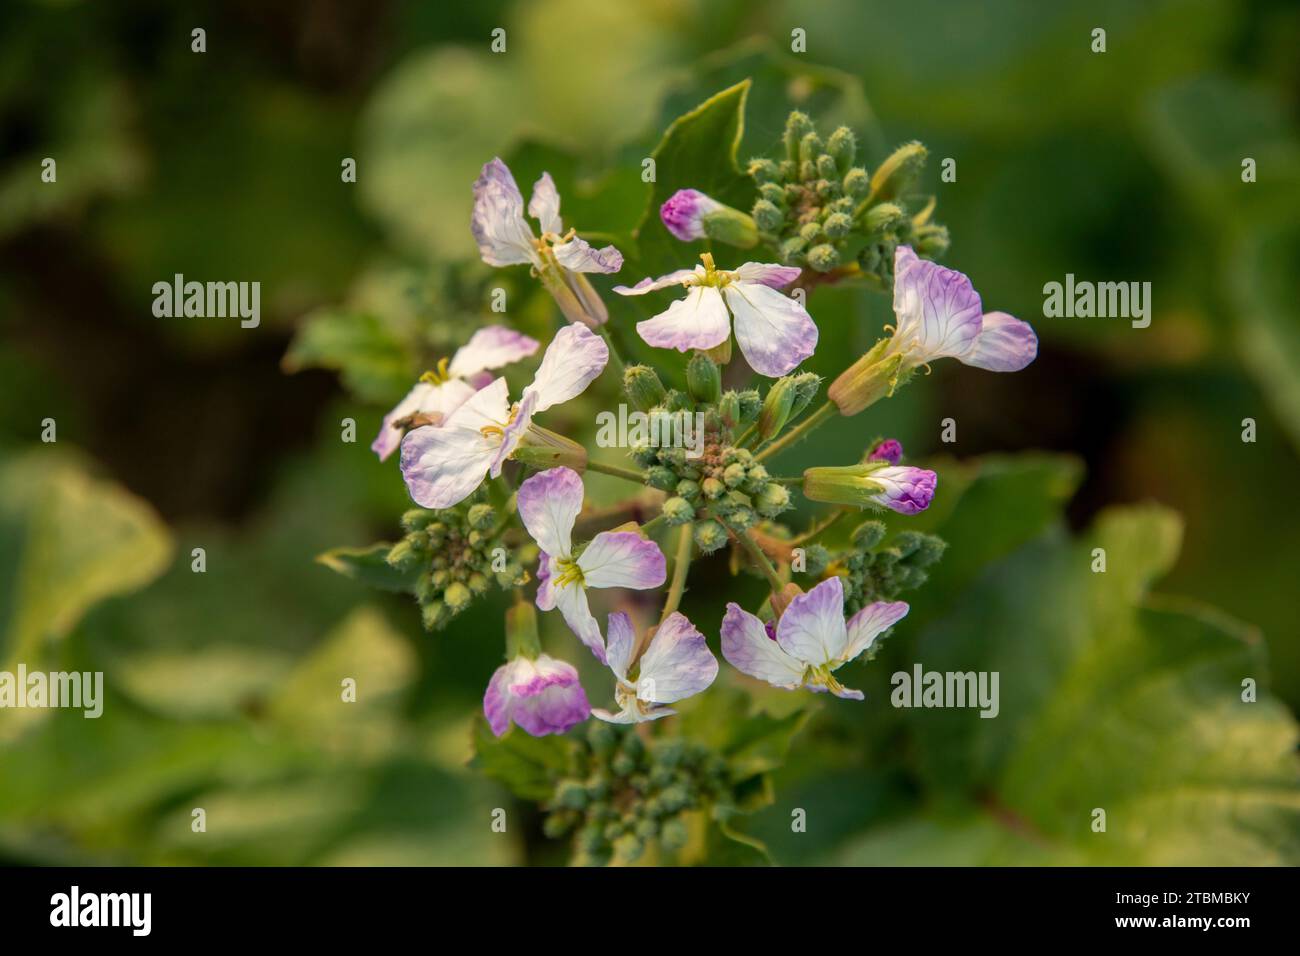 flowers.Plant is also known as wild radish, white charlock or jointed charlock (Raphanus raphanistrum) Stock Photo